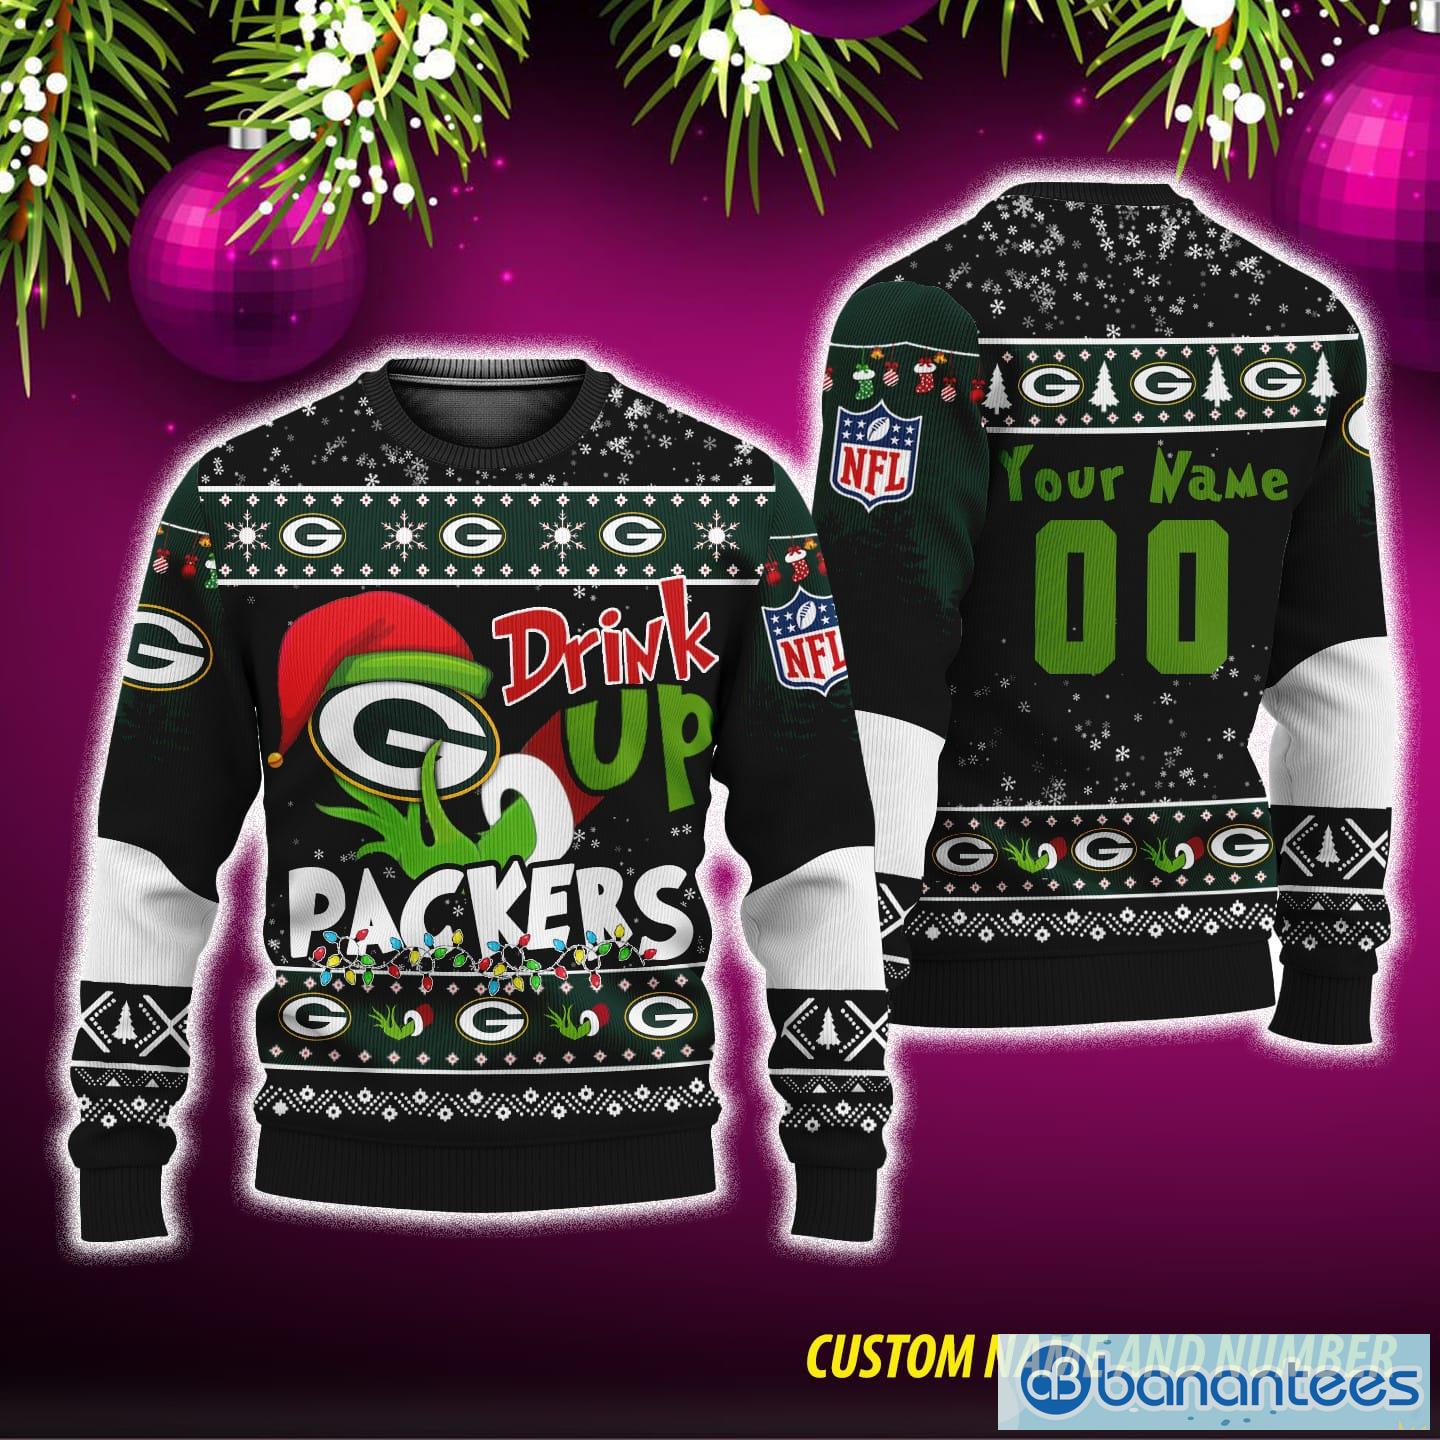 NFL Grinch Drink Up Green Bay Packers Ugly Christmas Sweater Custom Number And Name - NFL Grinch Drink Up Green Bay Packers Ugly Christmas Sweater Custom Number And Name